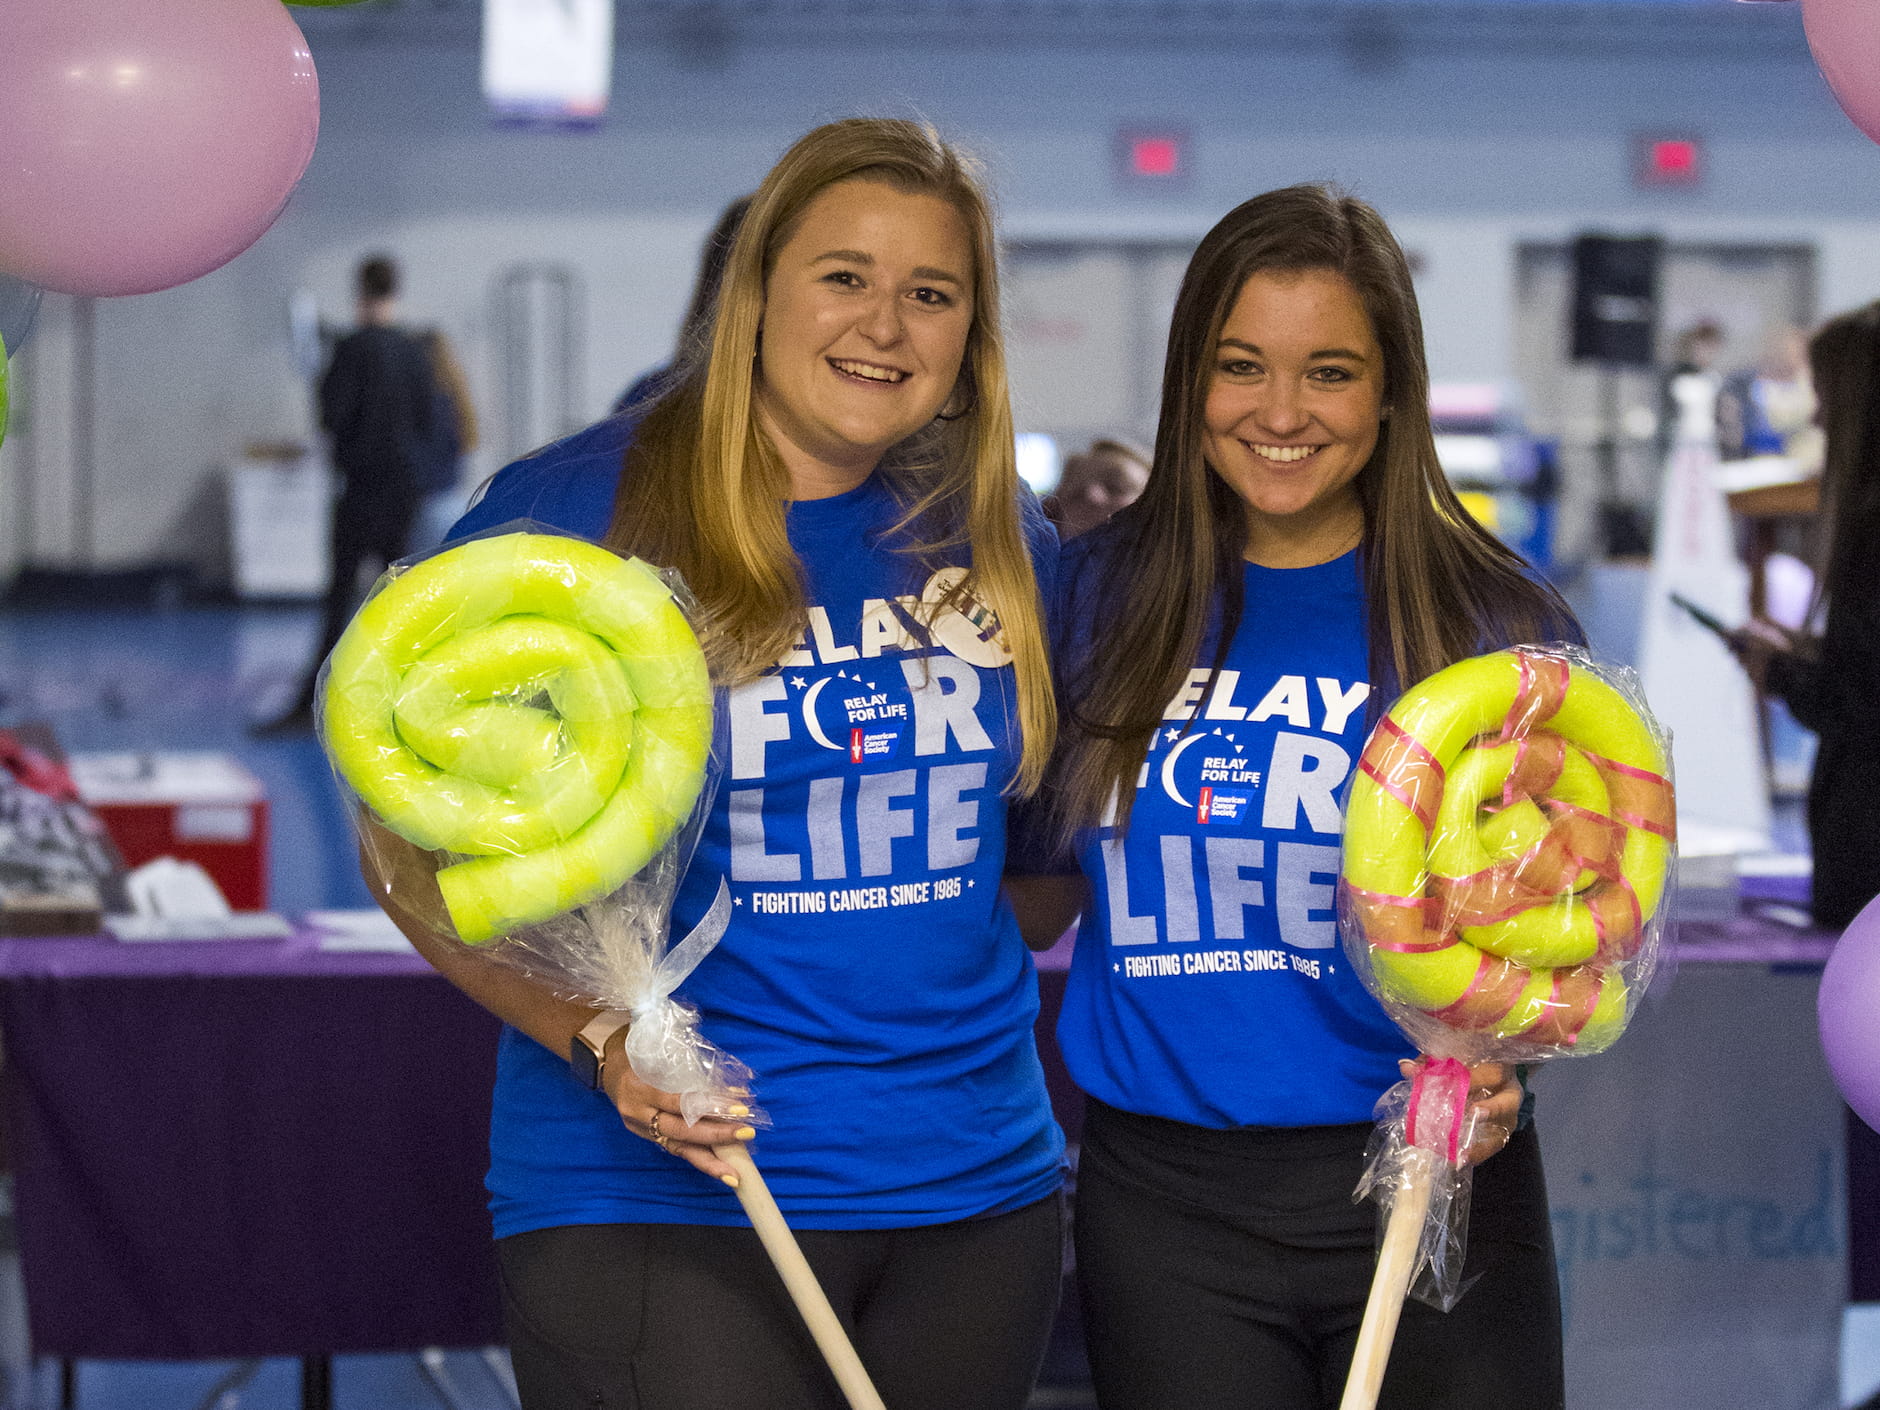 Endicott College students at Relay for Life event; photo by David Le.